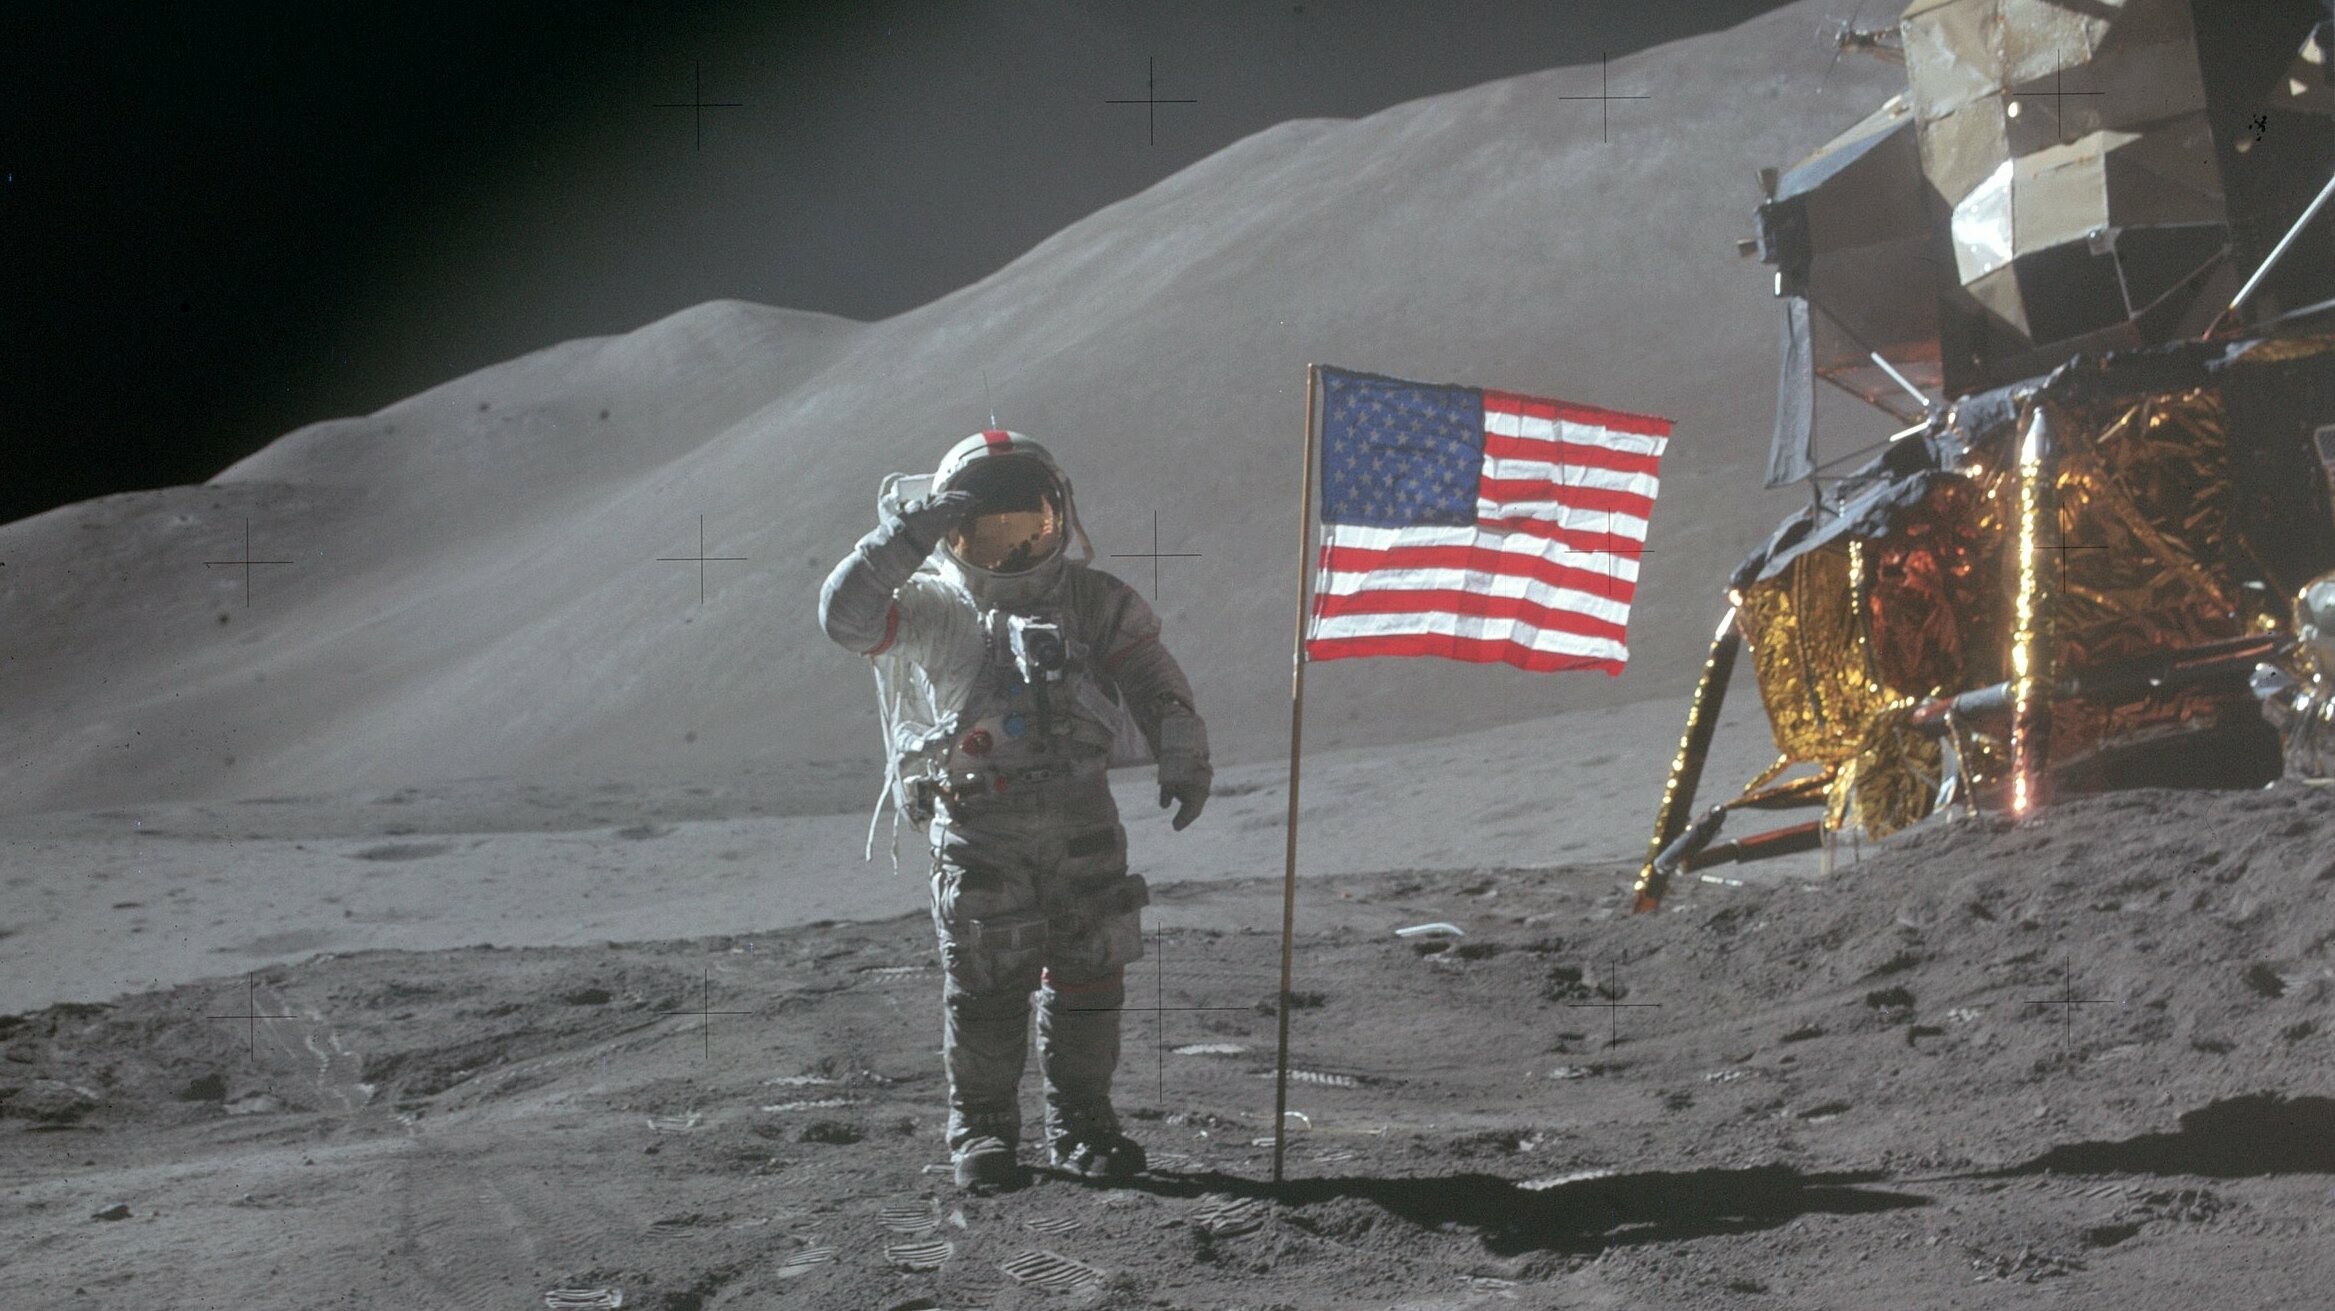 Man on the Moon: The crewed mission to land on the lunar surface, The Lunar Module. 2340x1320 HD Wallpaper.